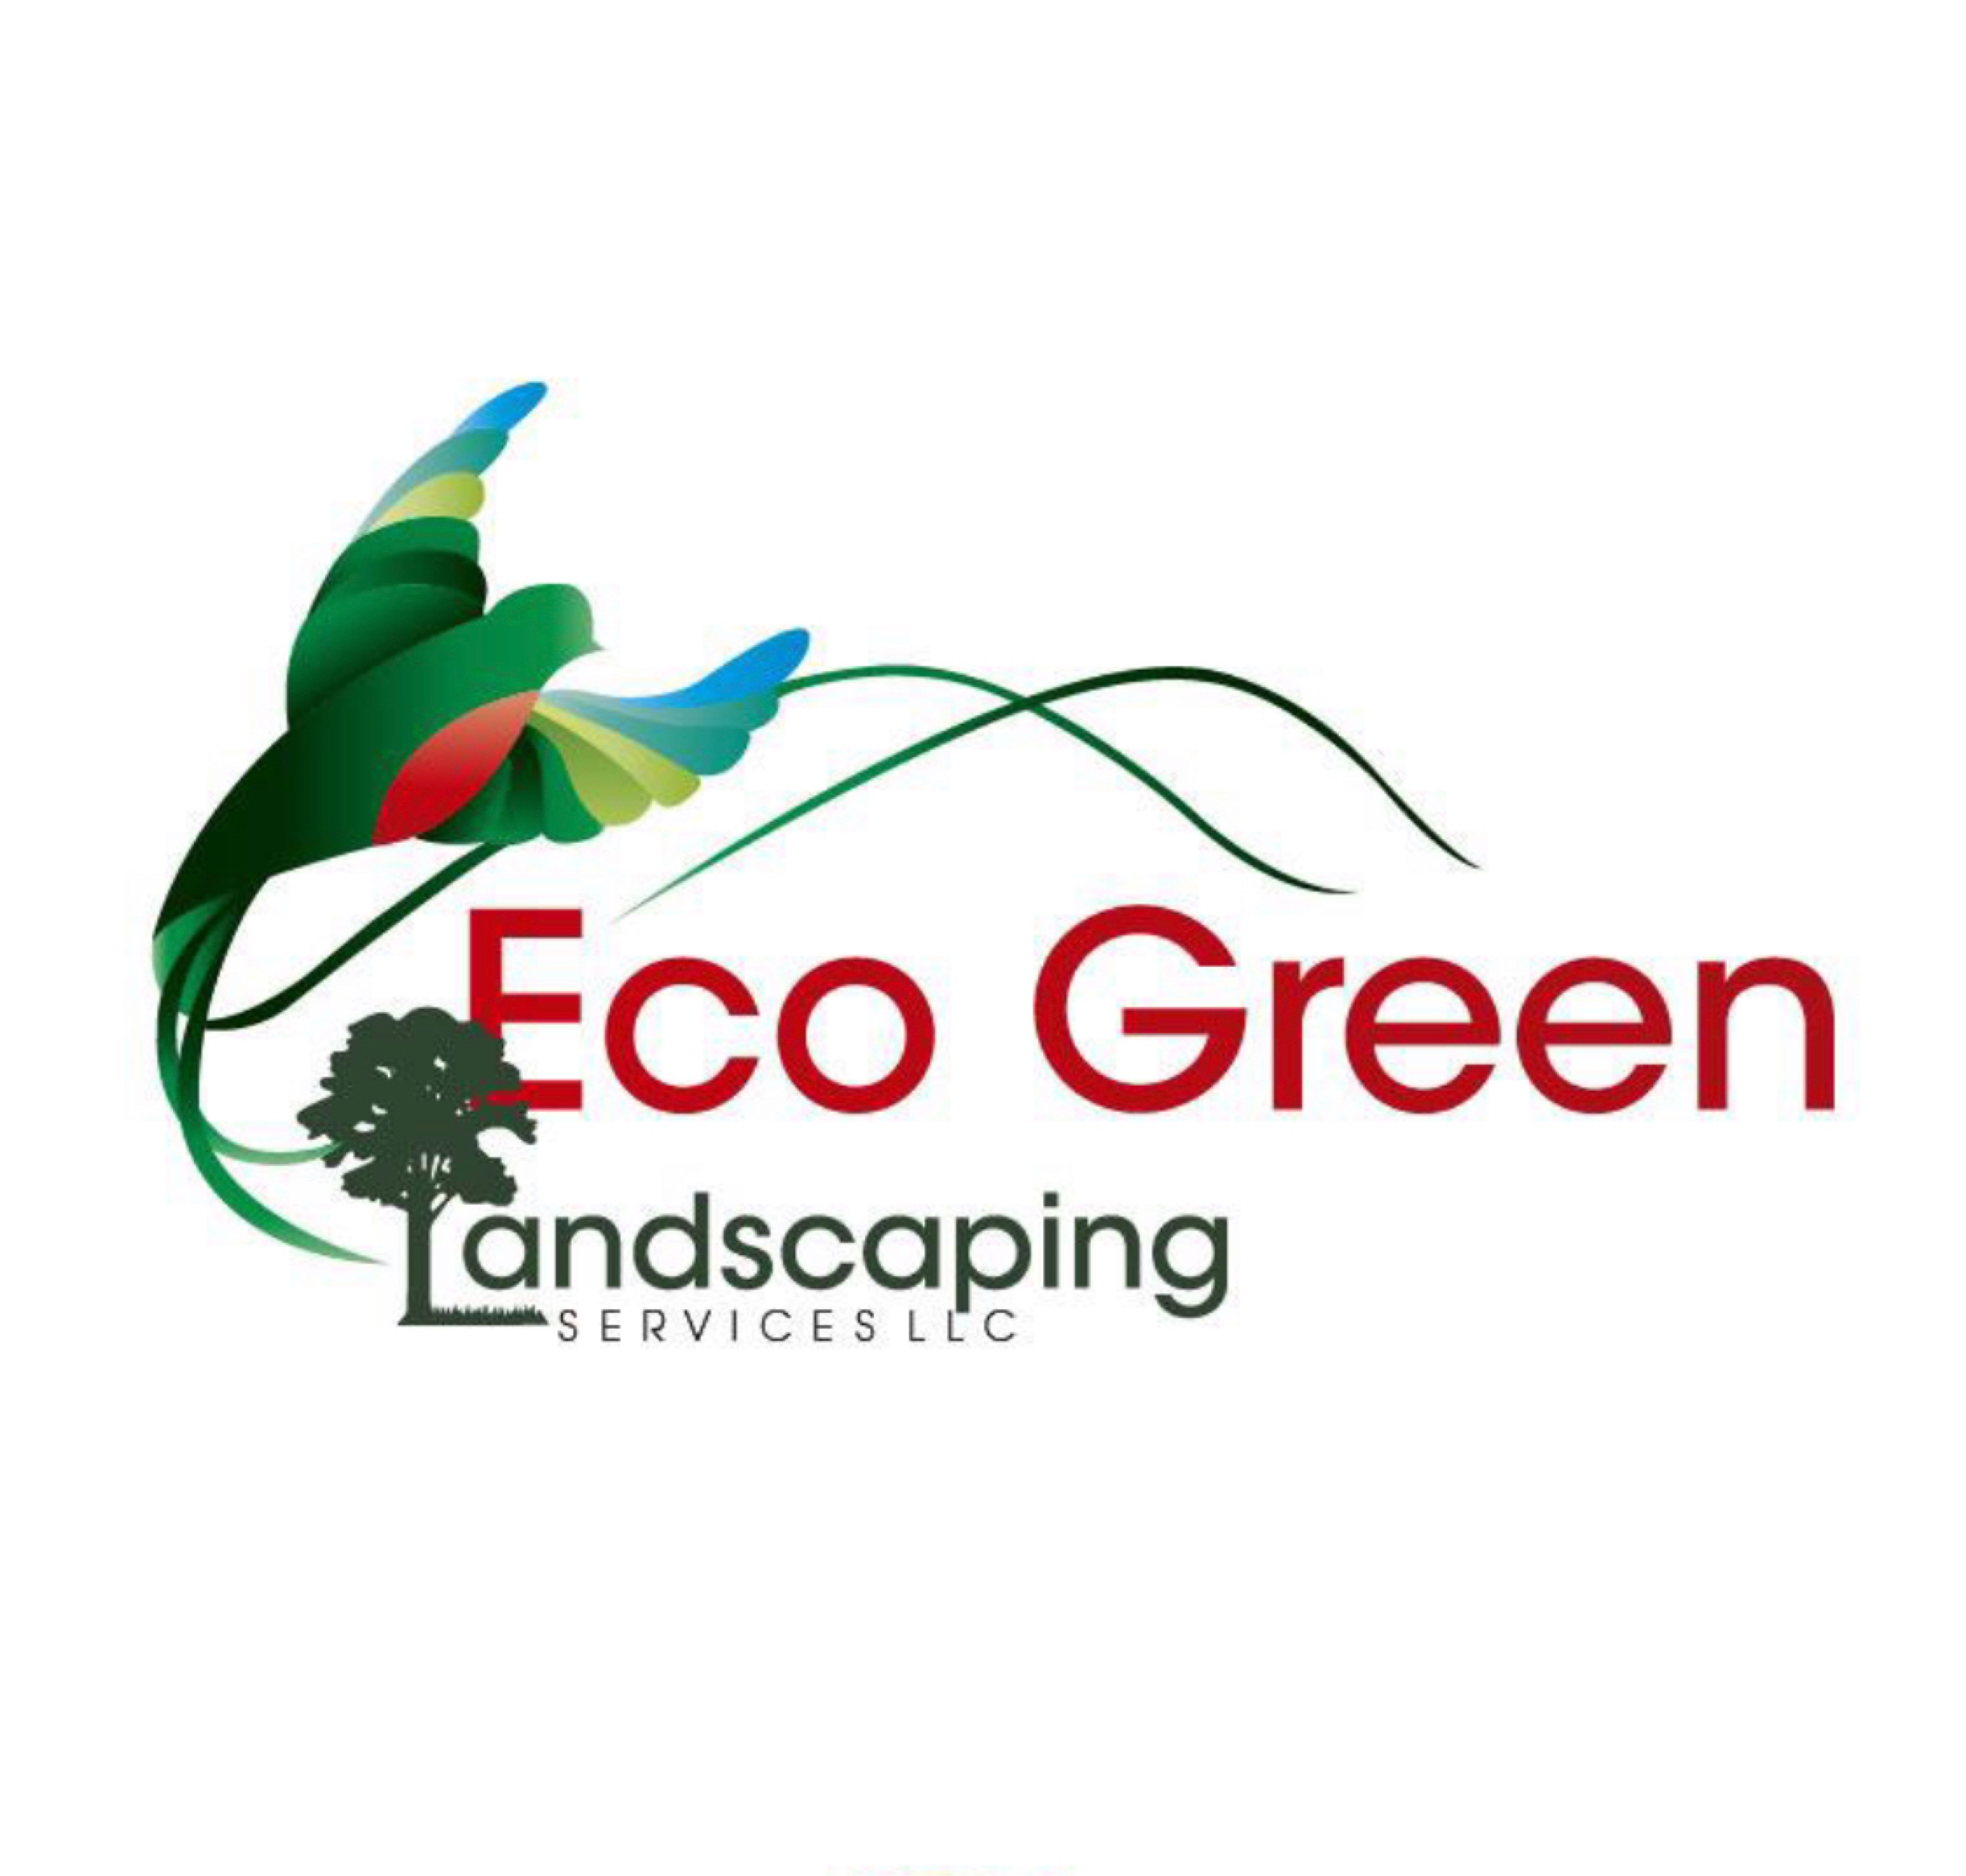 Eco Green Landscaping Services LLC Logo